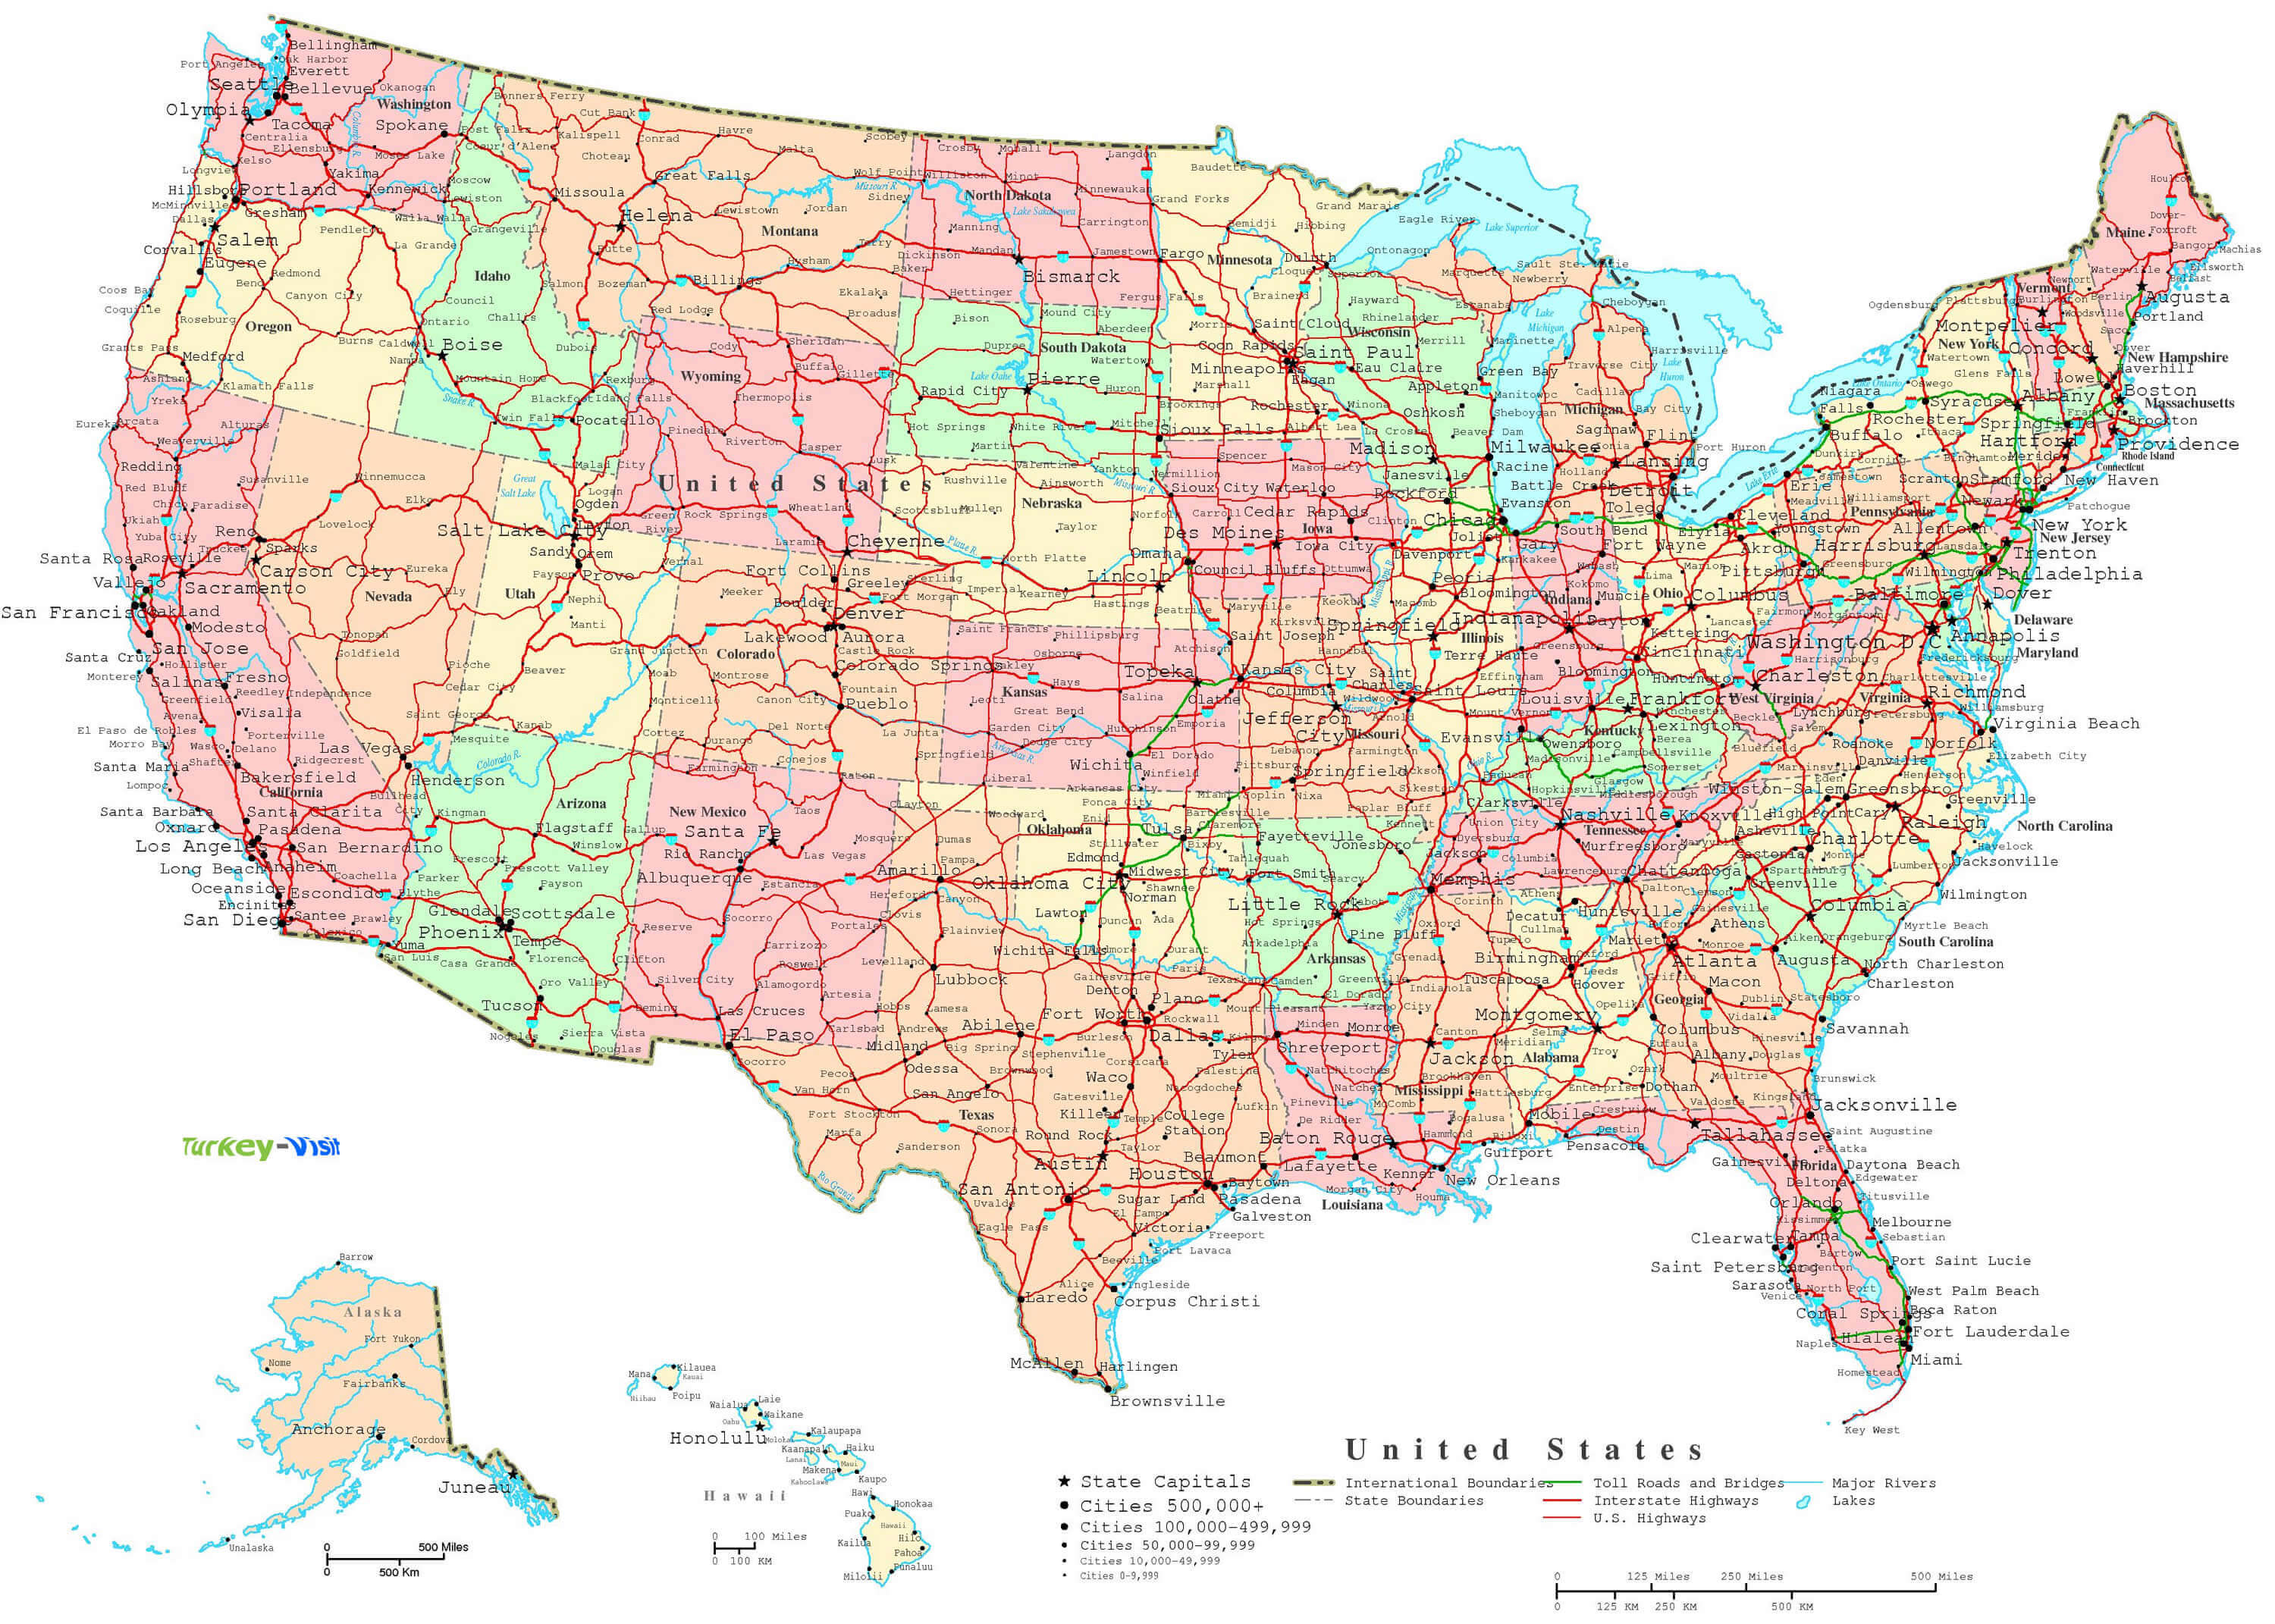 United States cities map large